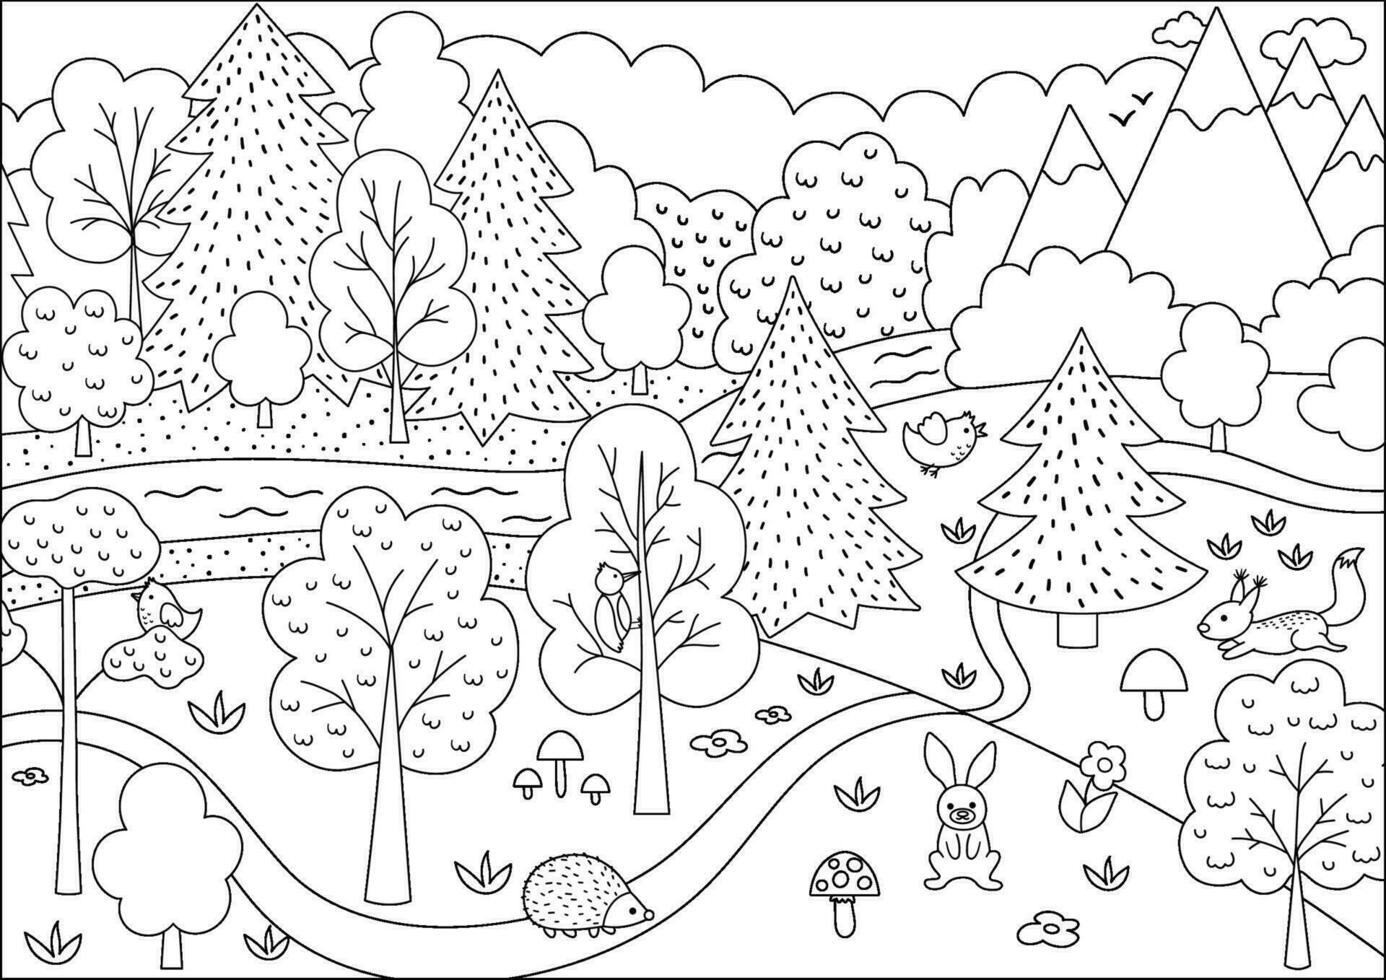 Vector black and white wild forest scene with trees, mountains, animals, birds. Spring or summer line woodland scenery with flowers, plants, mushrooms. Wild nature landscape or coloring page